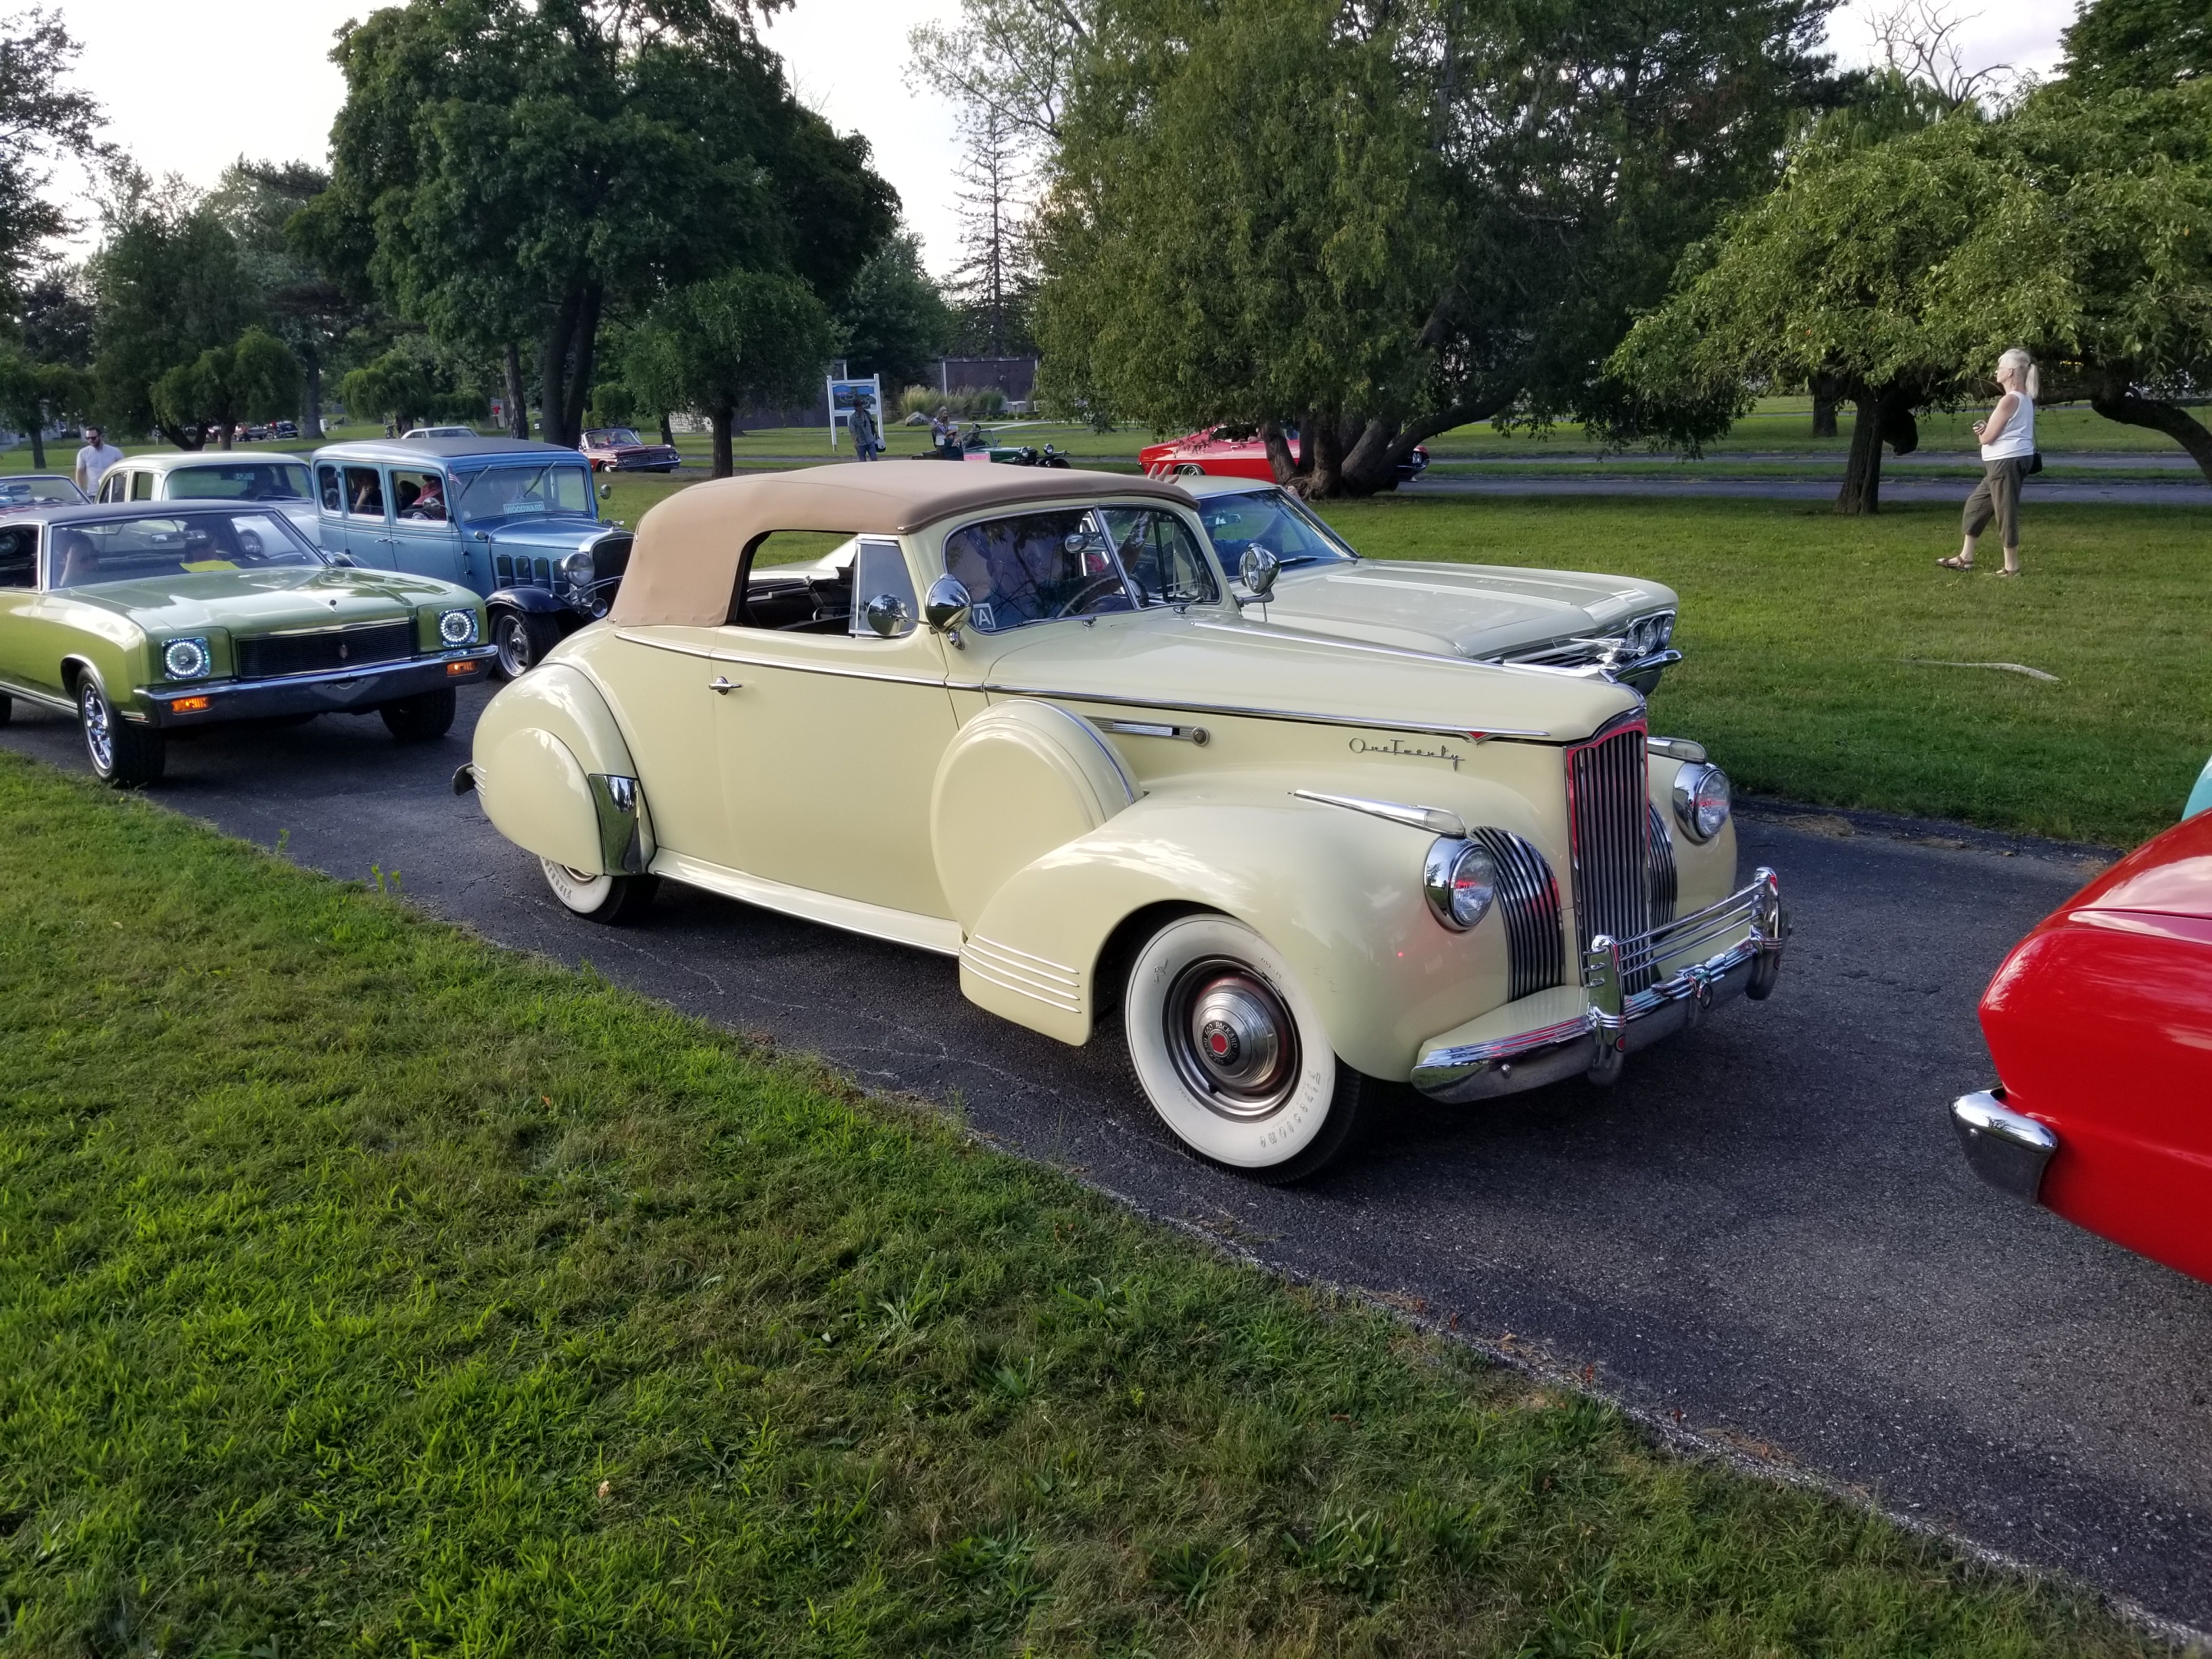 1941 Packard 120 Convertible from the Front